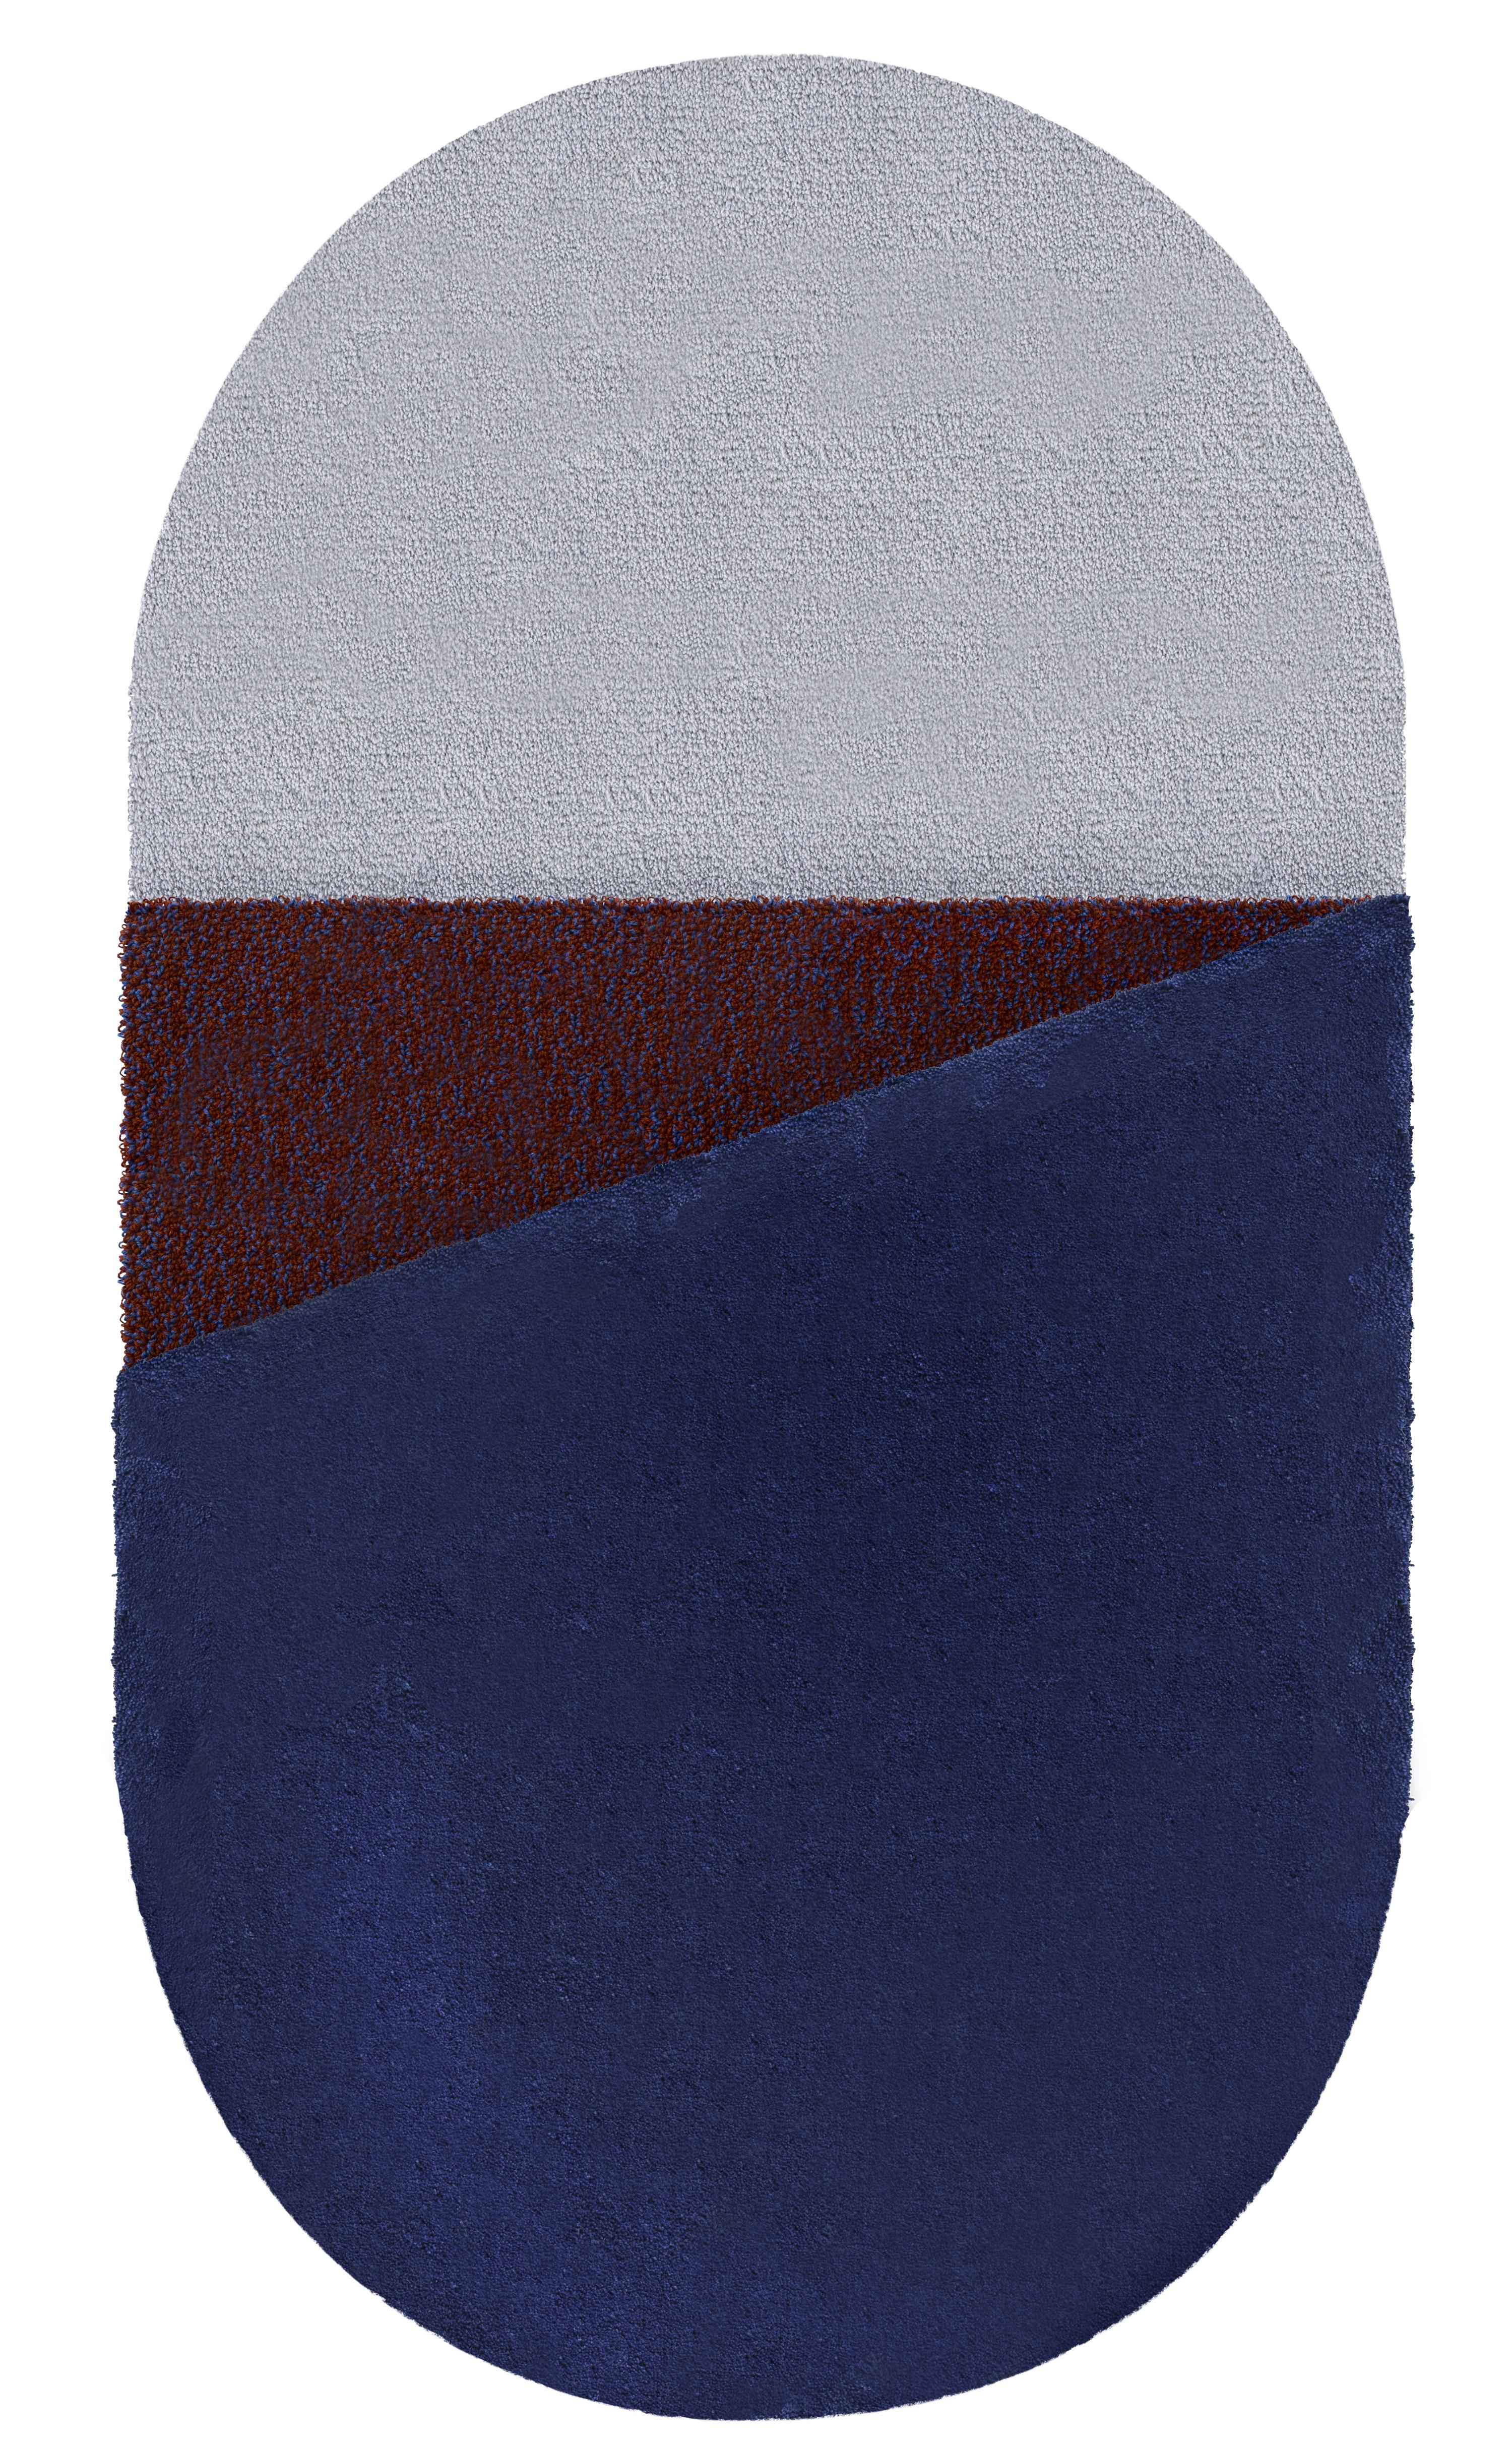 Small Blue Oci Right rug by Seraina Lareida
Dimensions: W 70 x H 130 cm 
Materials: 100% New Zeland top-quality wool.
Available in sizes Medium or Large. Also available in colors: Brick/Pink, Yellow/Gray, Brick/Pink, Bordeaux/Ecru and,